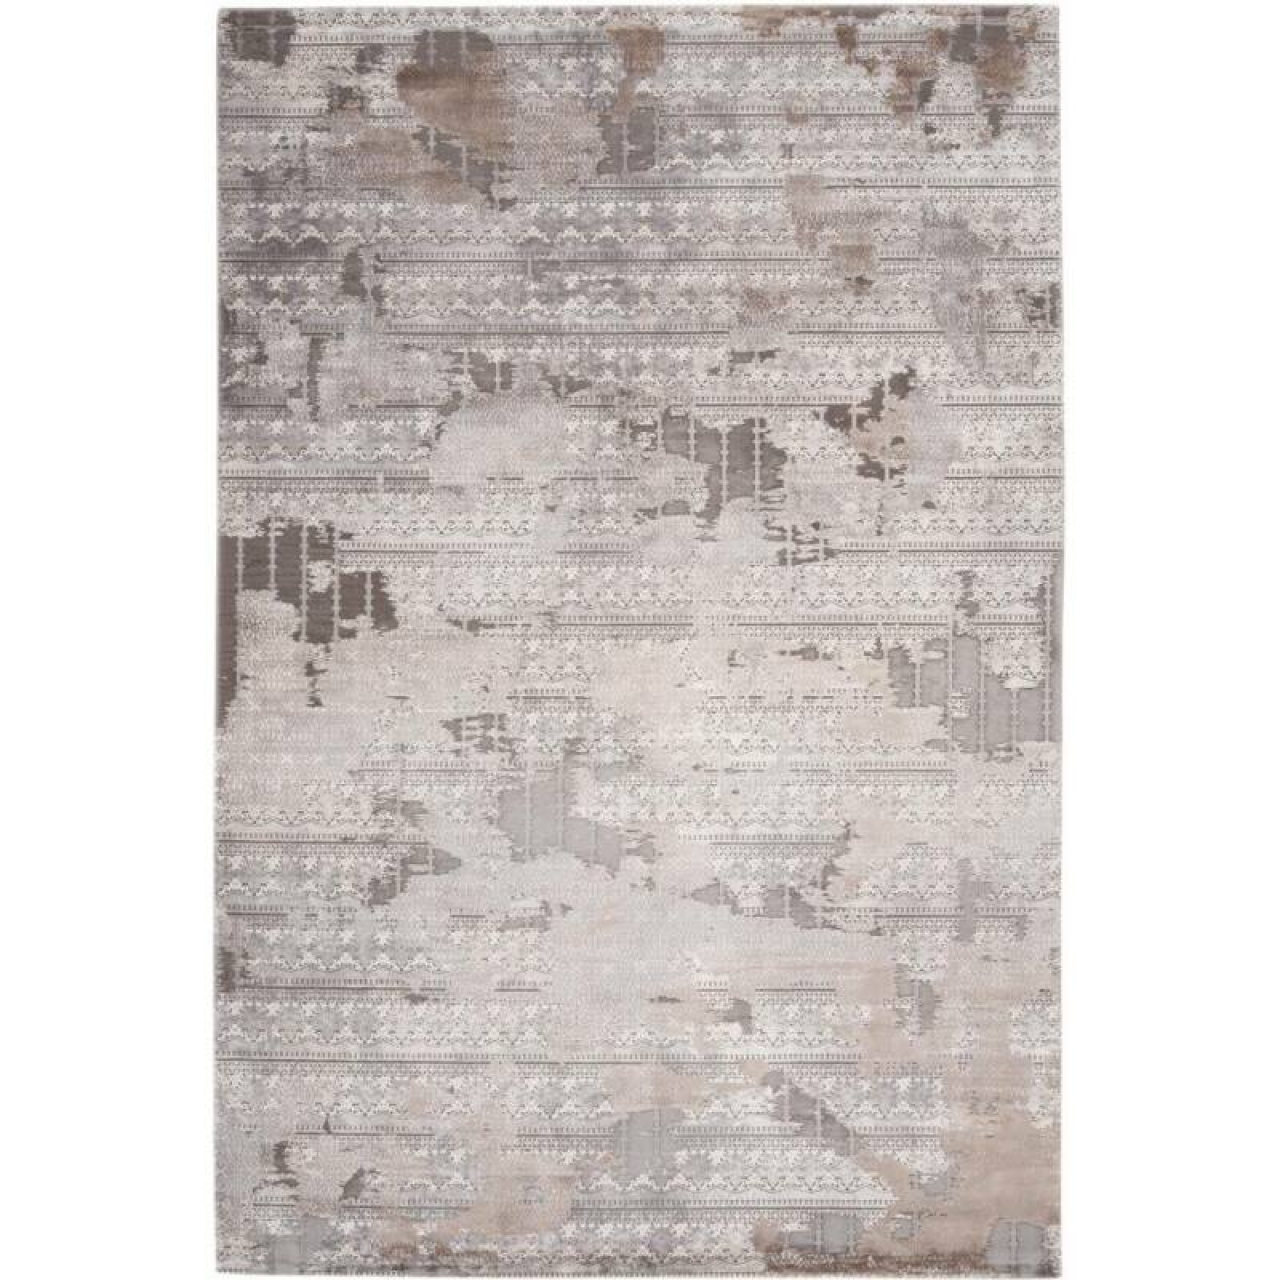 Obsession Haute Couture Jewel 955 Taupe szőnyeg-120x170